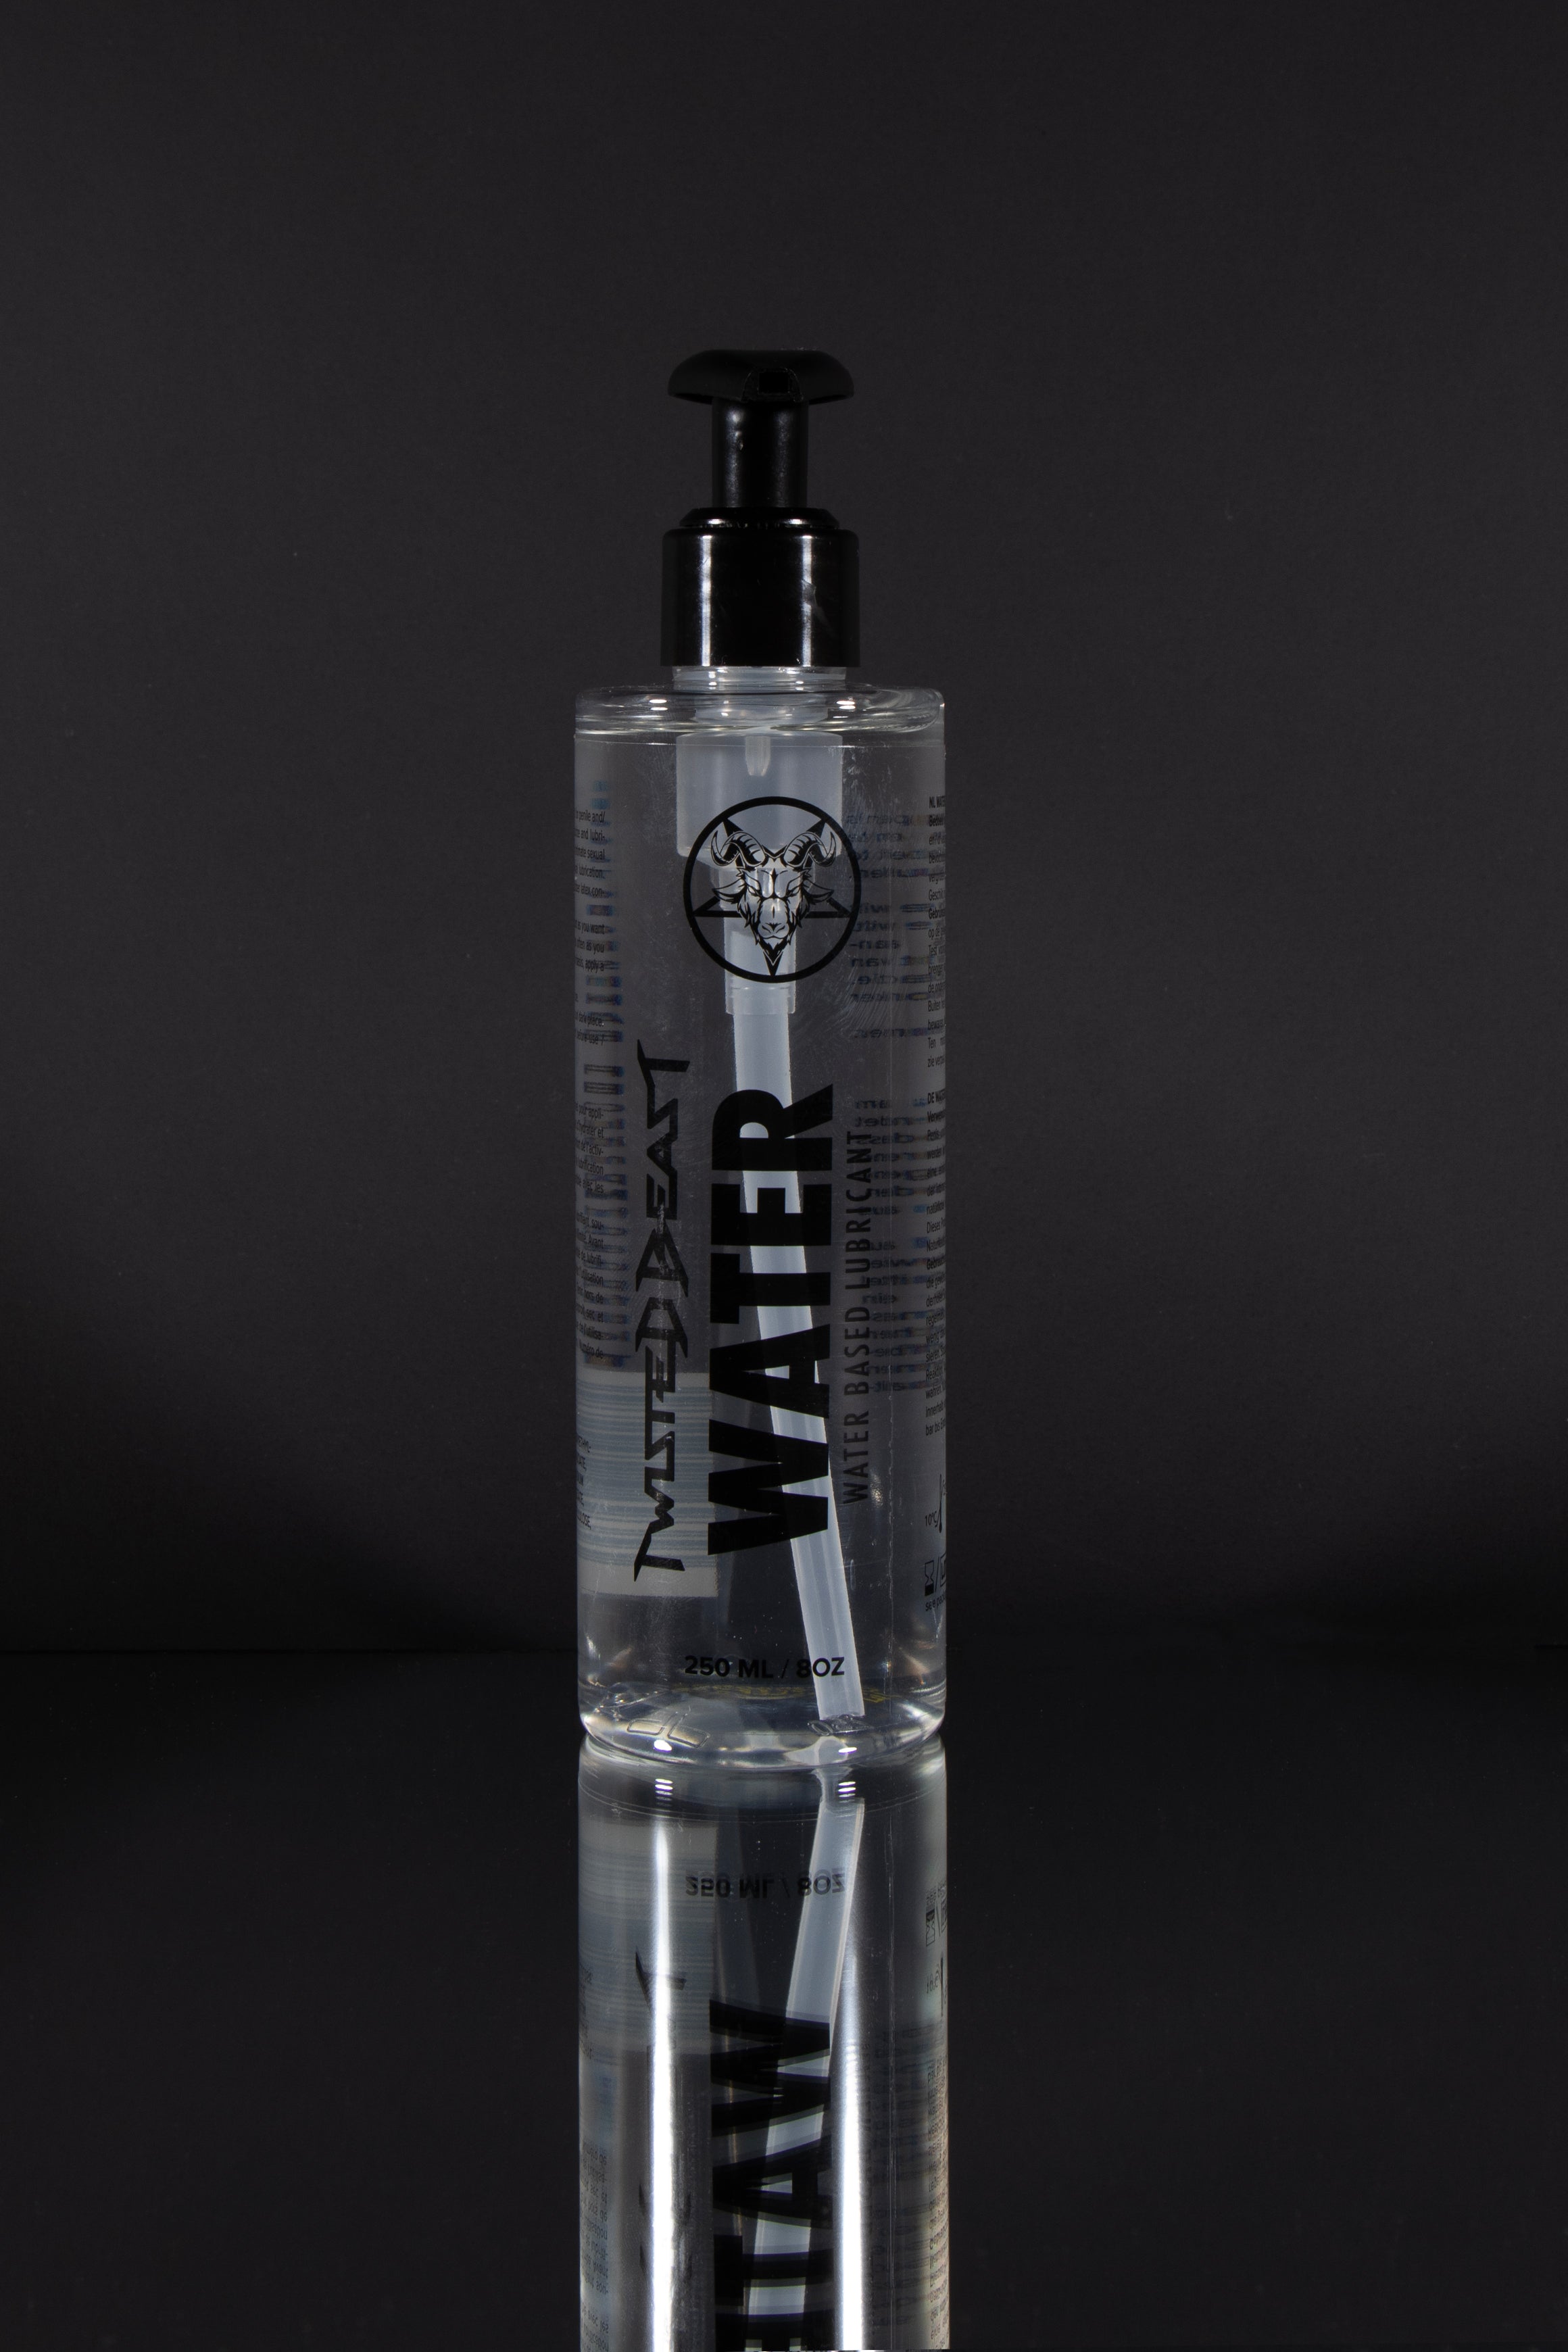 A product photo of a bottle of water-based lube.